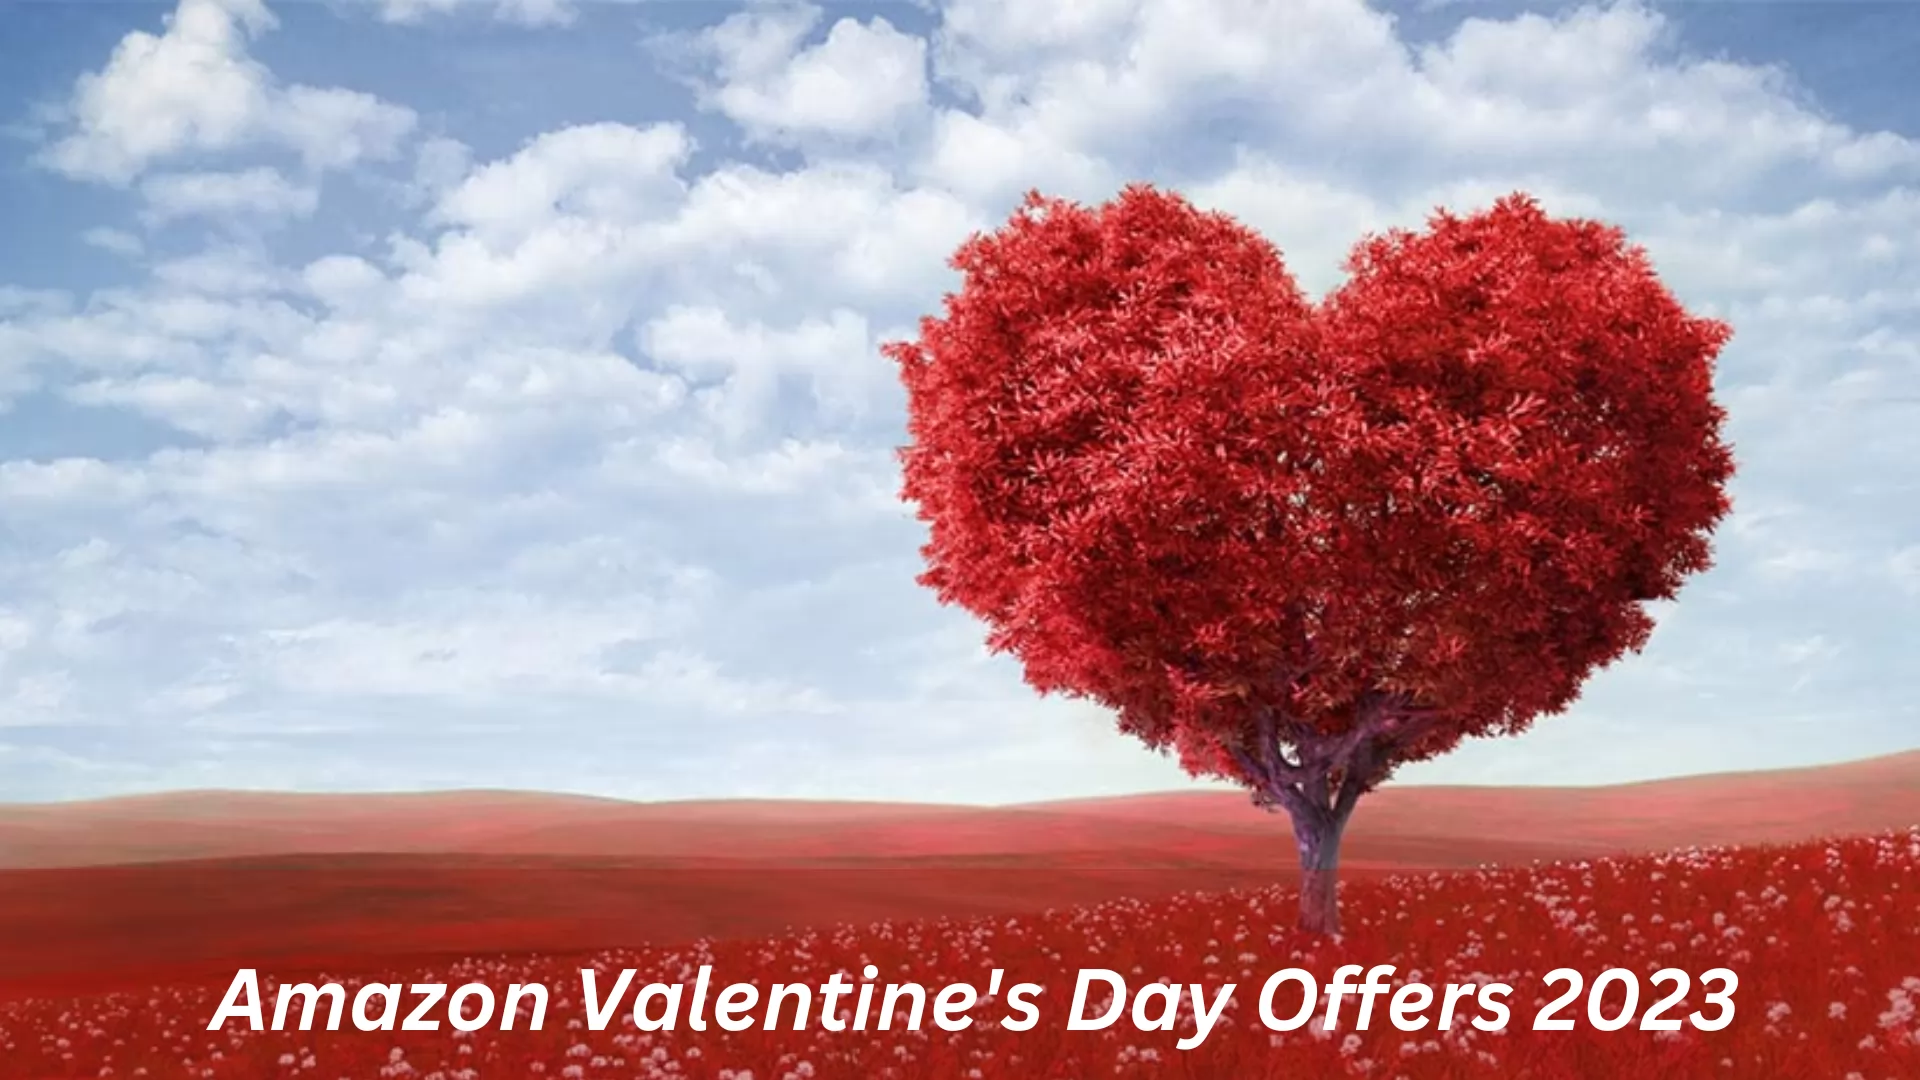 Amazon Valentines Day Offers 2023